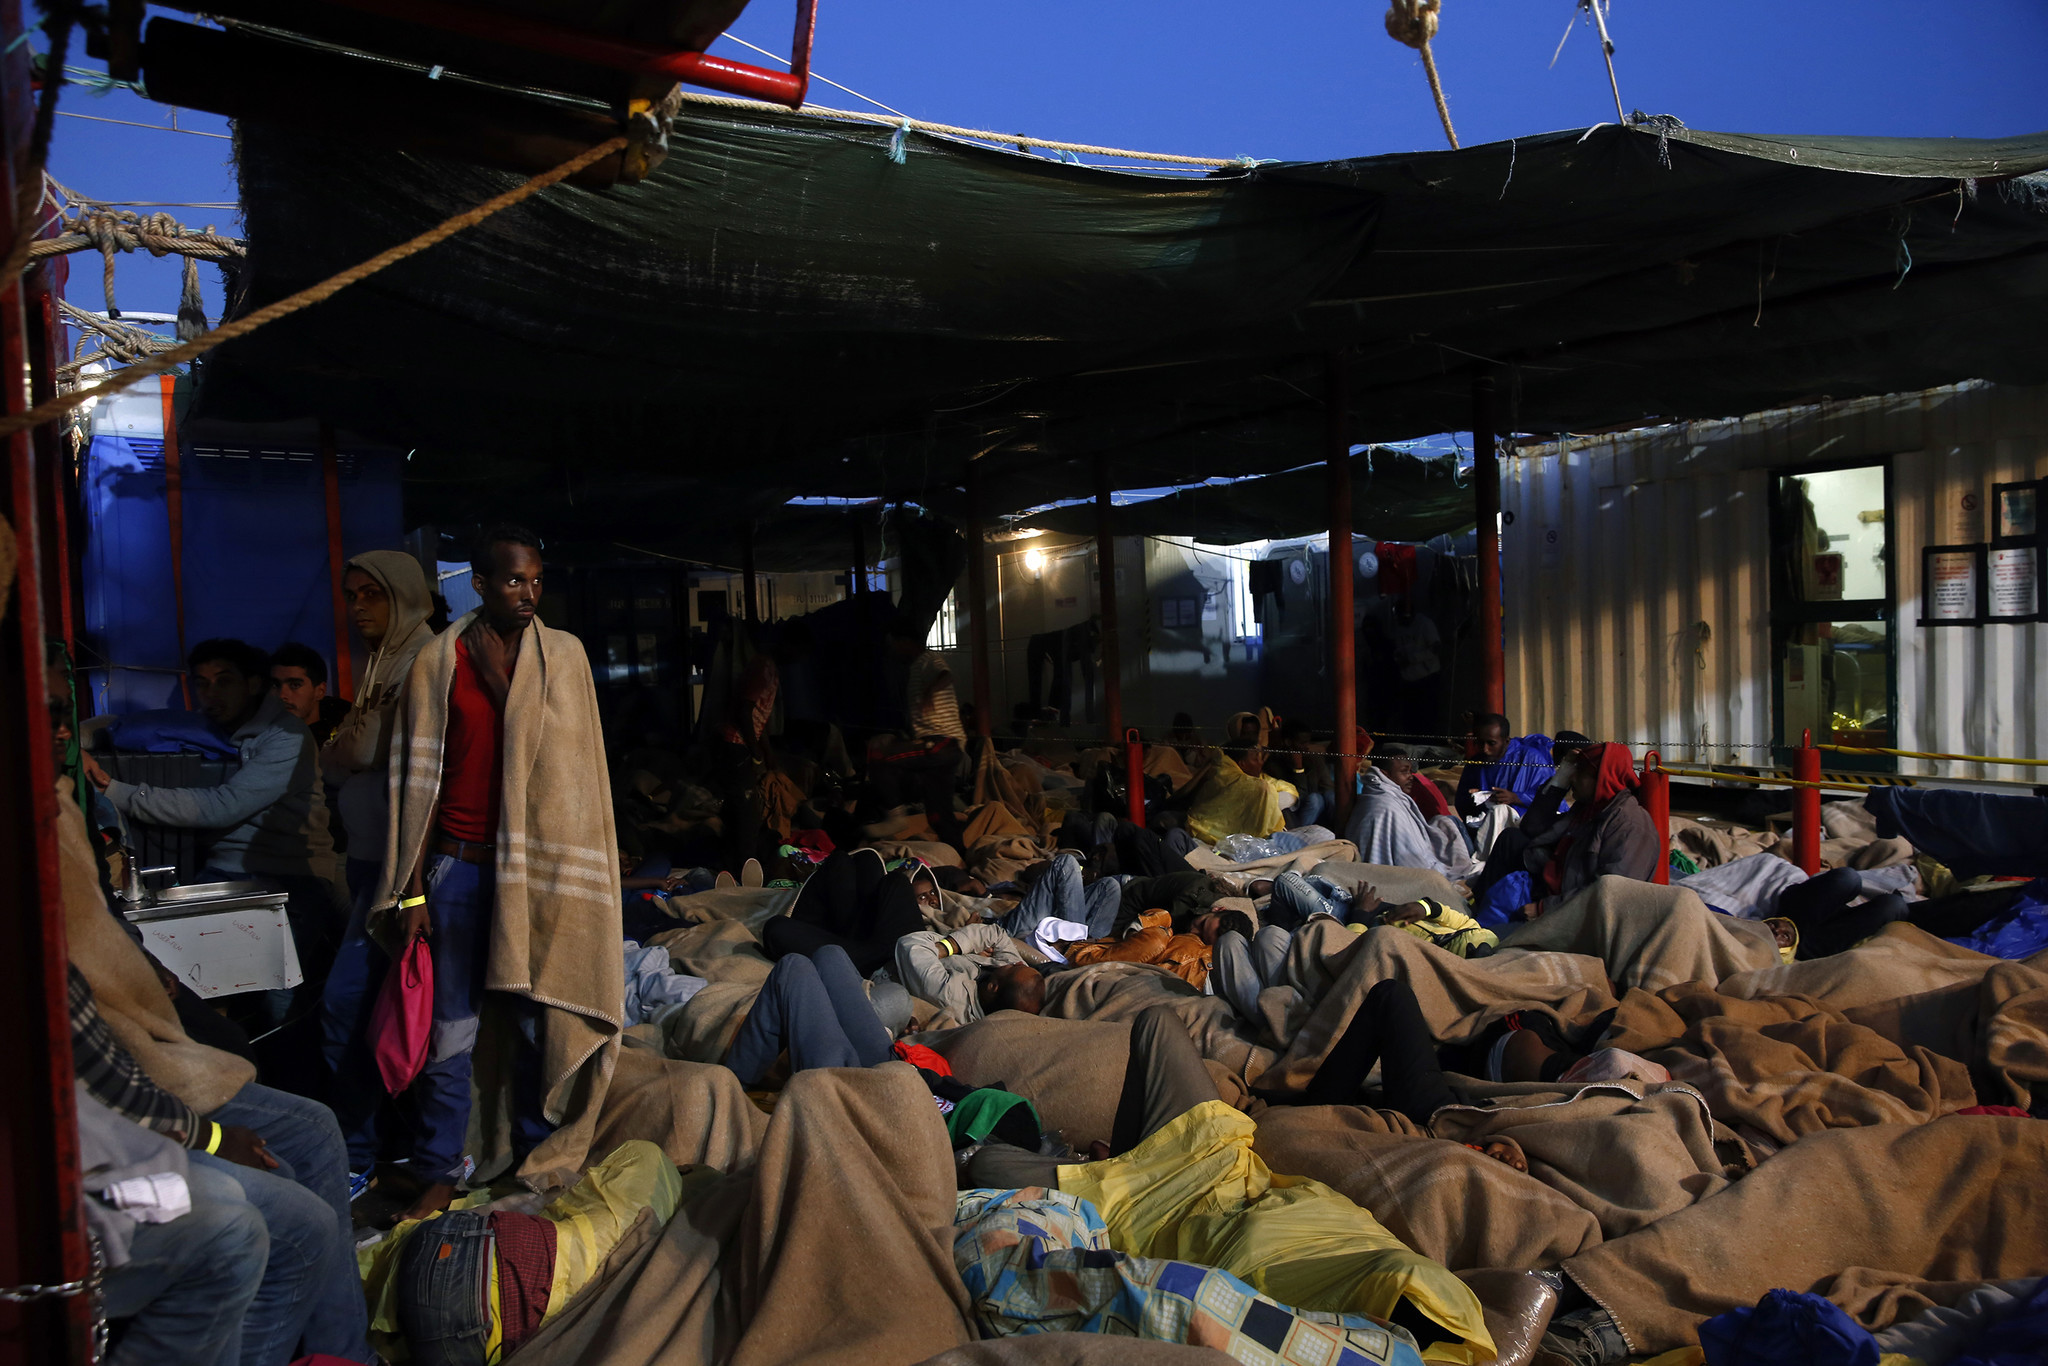 Migrants sleep on the deck of the rescue ship Vos Hestia, operated by Save the Children, as it heads for Sicily. The migrants, of several nationalities, were bound for Europe.